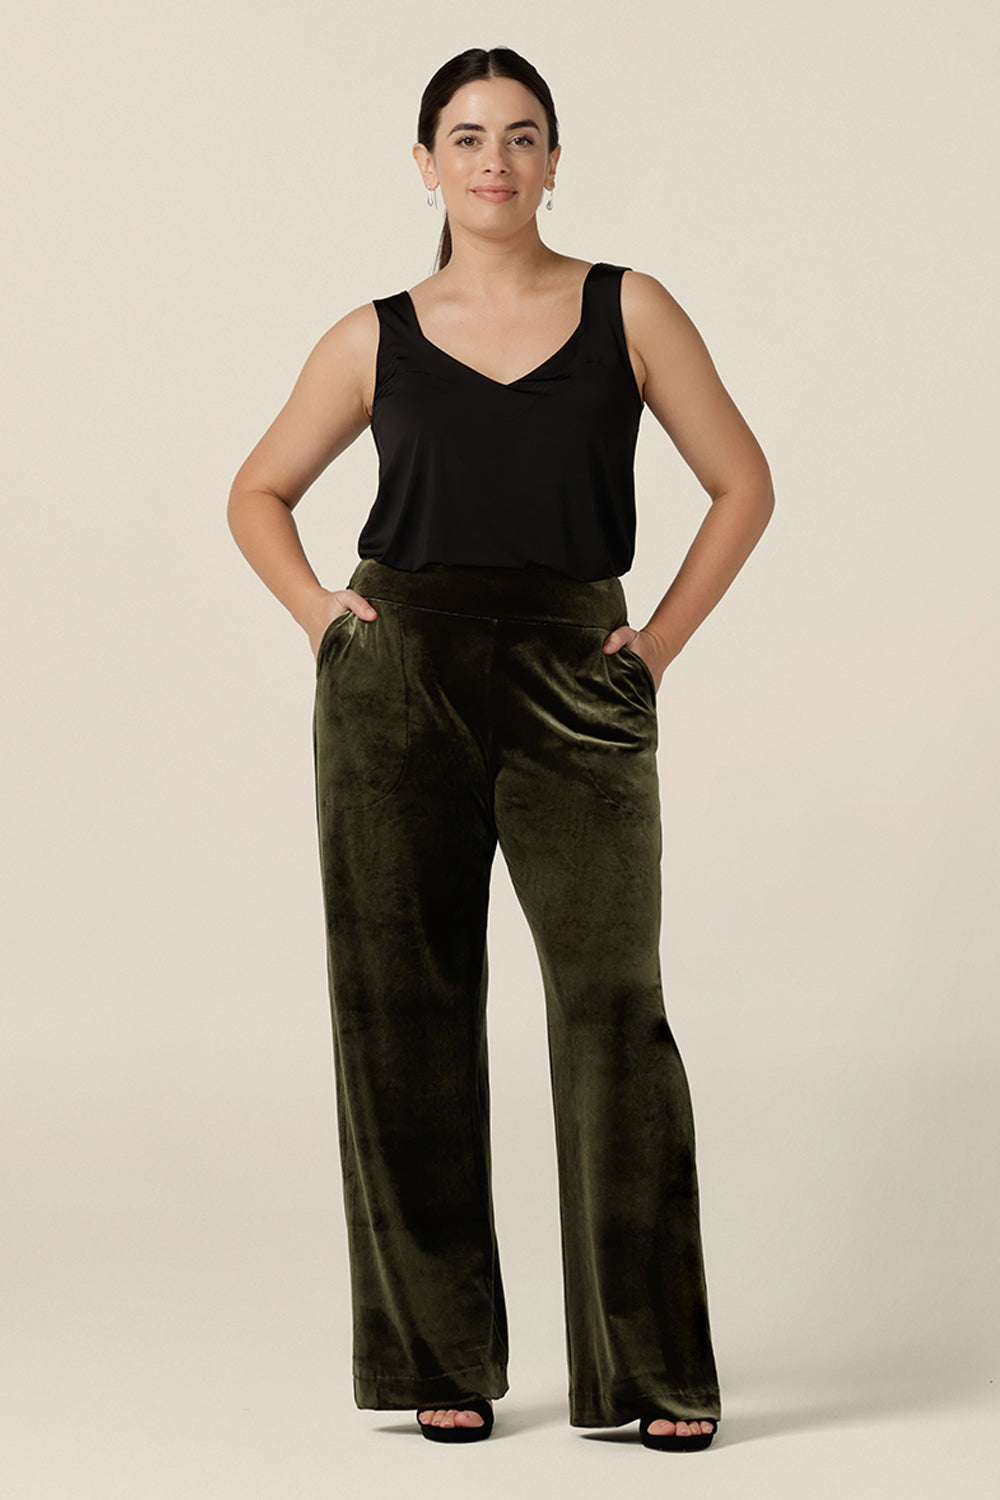 Good cocktail pants for women, the Deni Pants are straight, wide leg pants in green velour and are shown with a black cami top. These evening trousers are pull on pants and comfortable in stretch fabric. Shop this occasion and cocktail attire online at Australian fashion brand, Leina & Fleur.